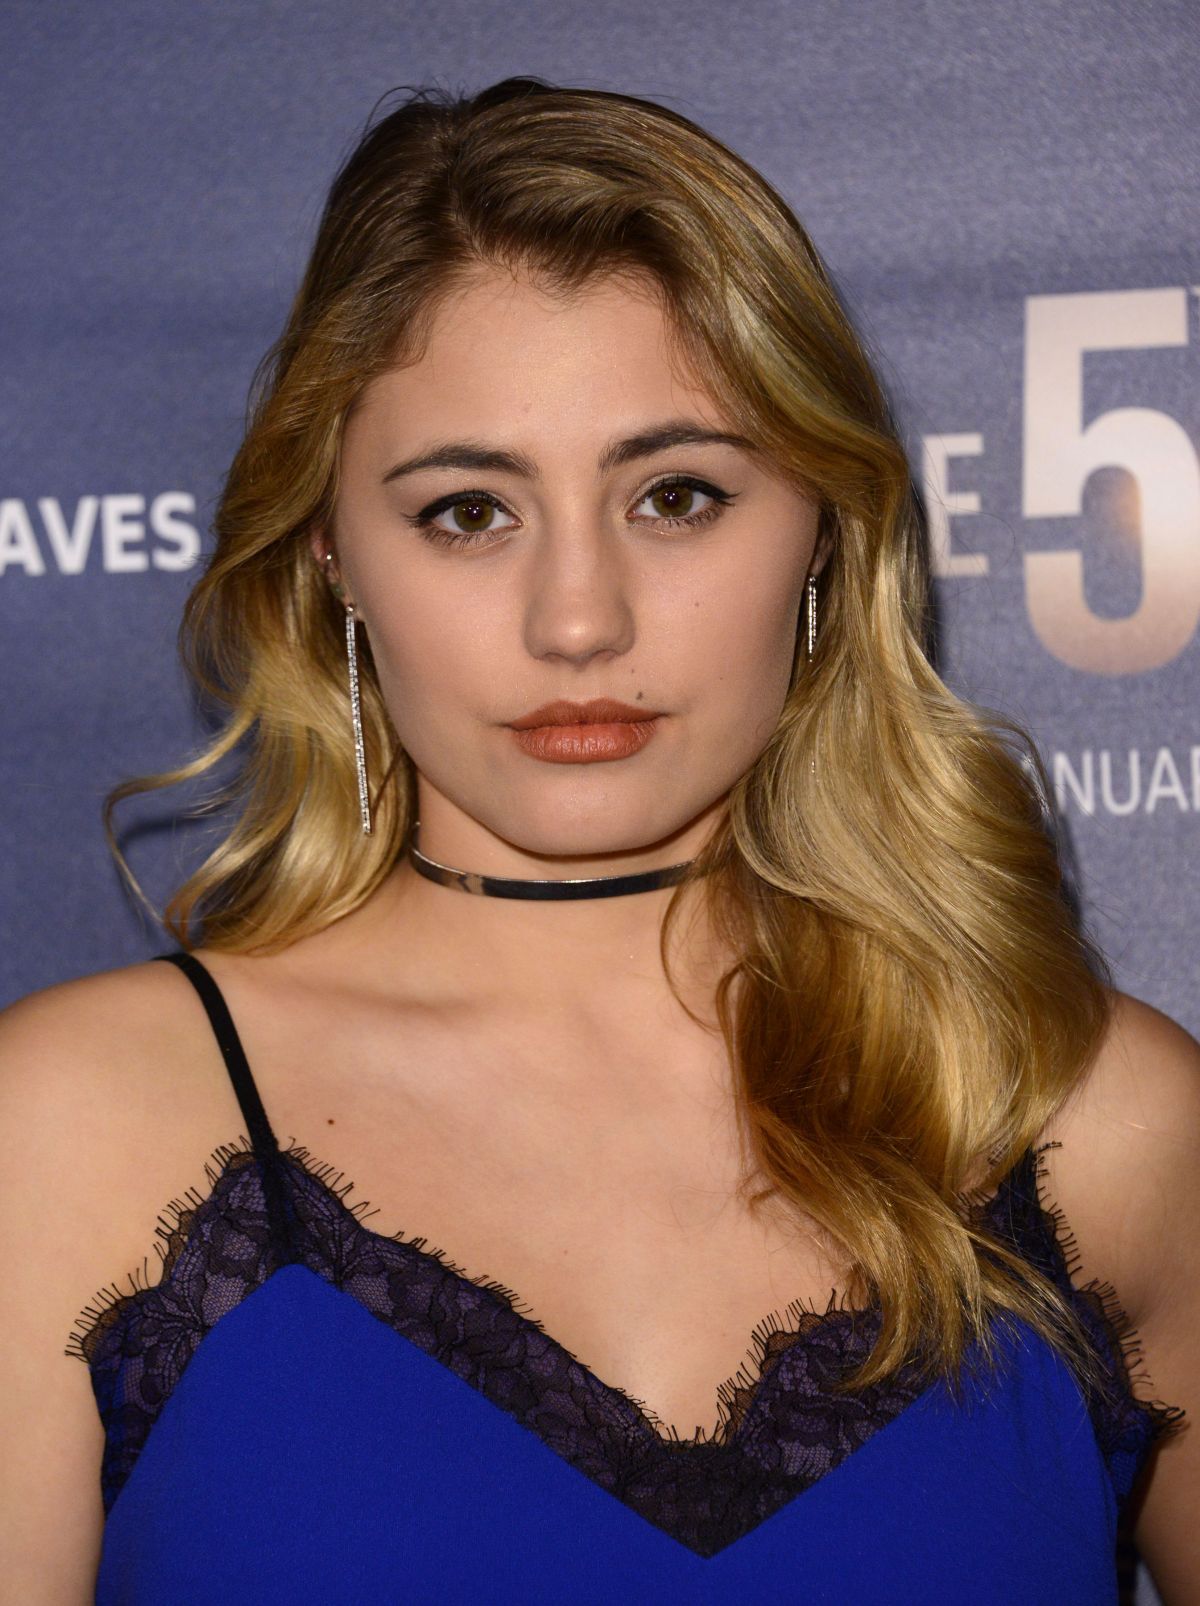 HD Quality Wallpaper | Collection: Music, 1200x1606 Lia Marie Johnson